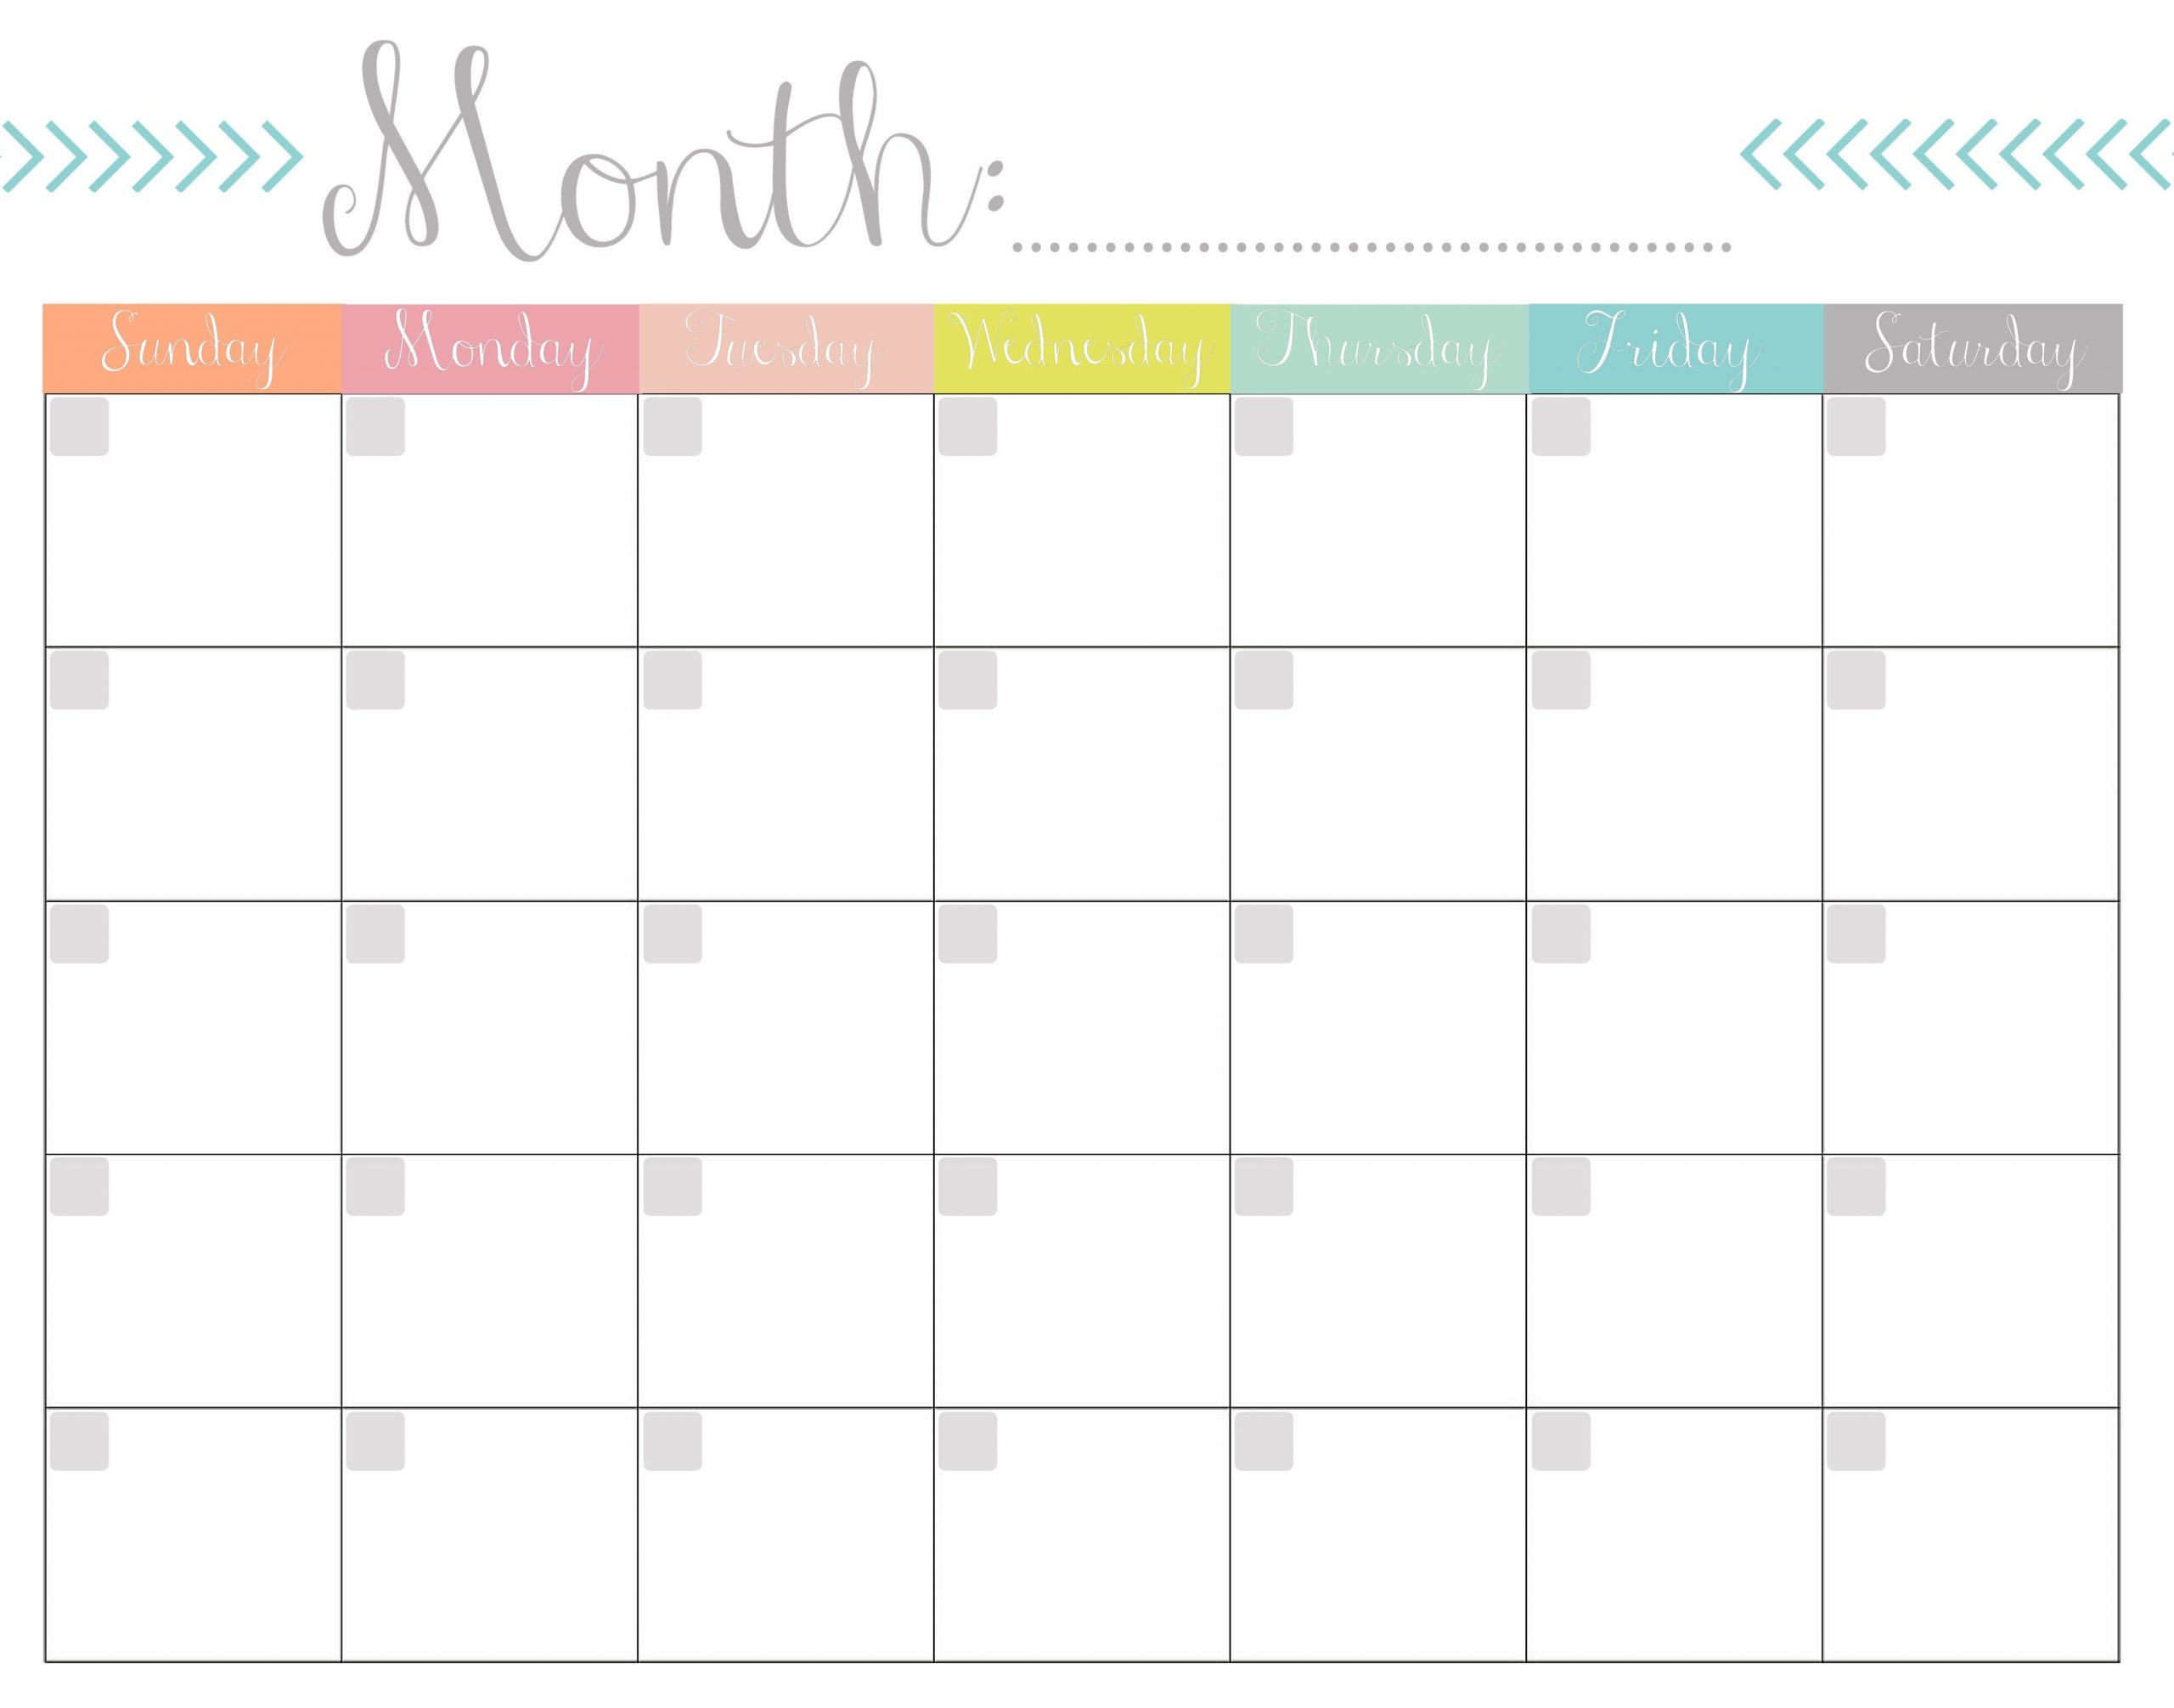 Calendar Template to Print Blank Calendar 2020 Printable Monthly Payday Bills and Due